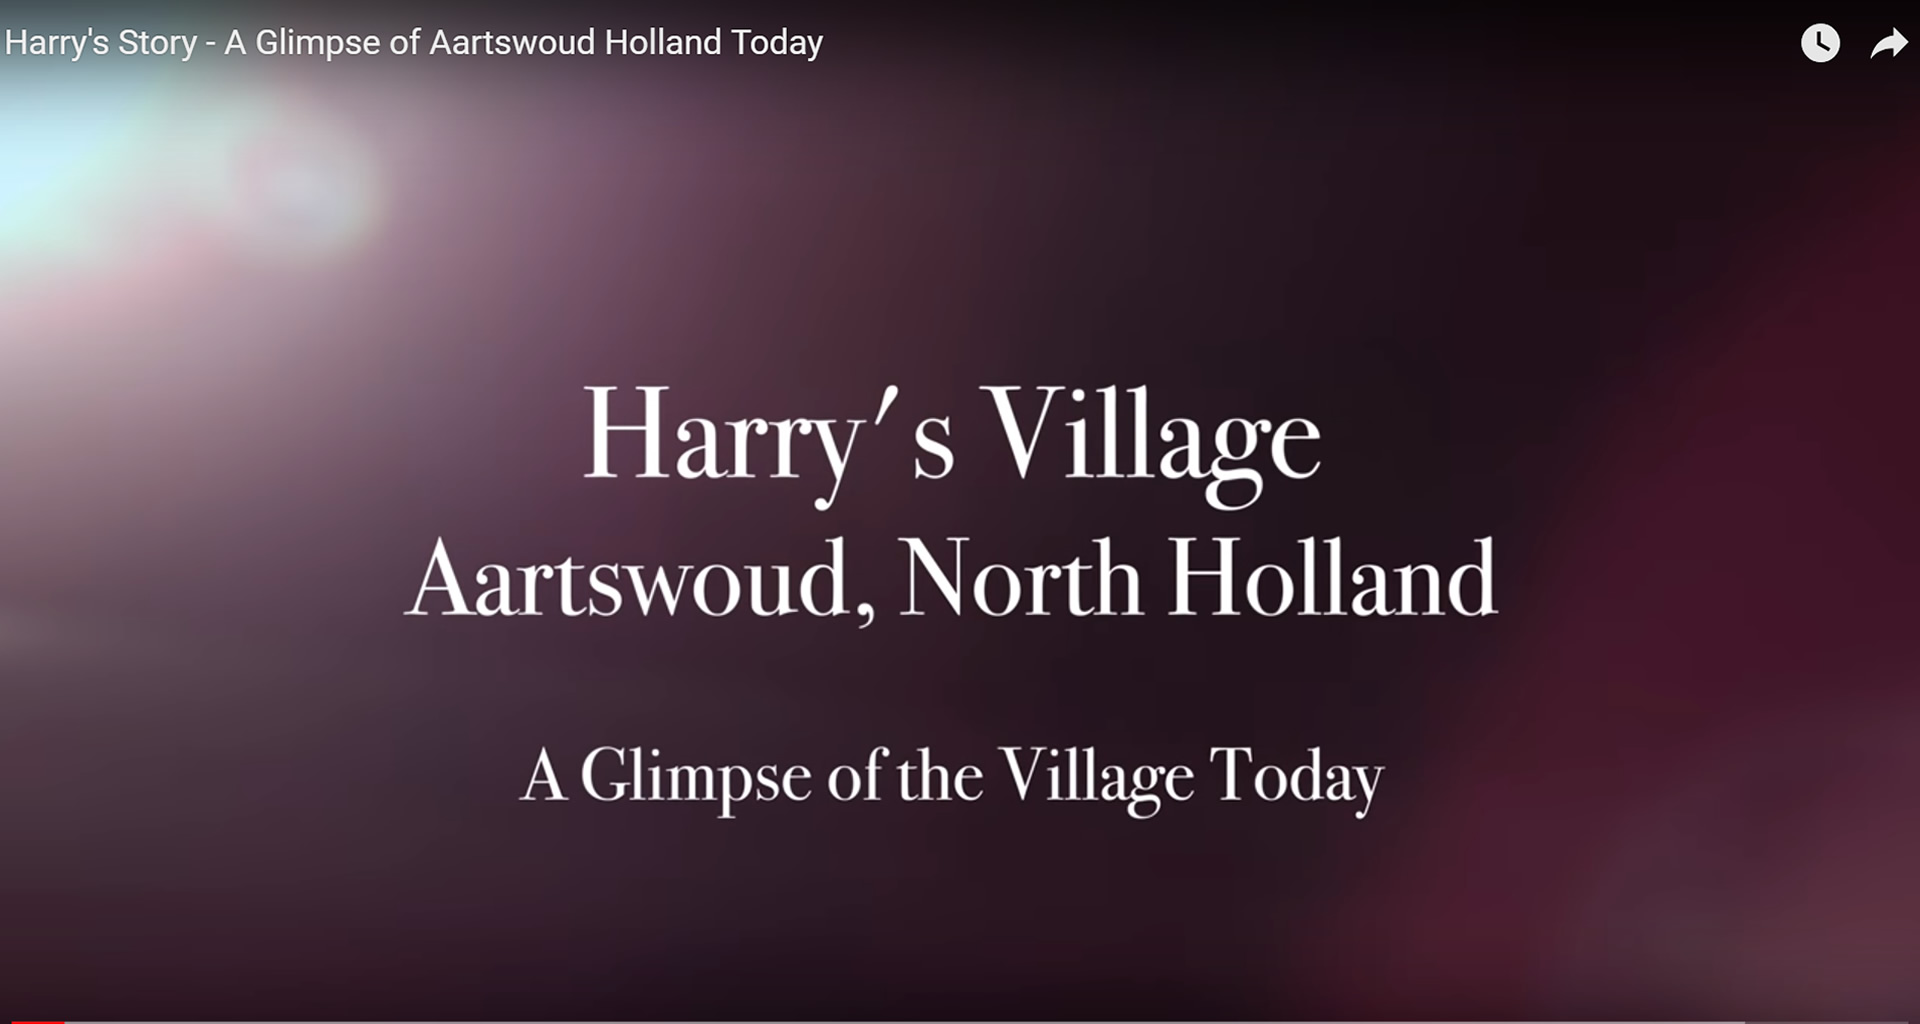 Harry's Story - Aartswoud, Netherlands - a Glimpse of the Village Today.